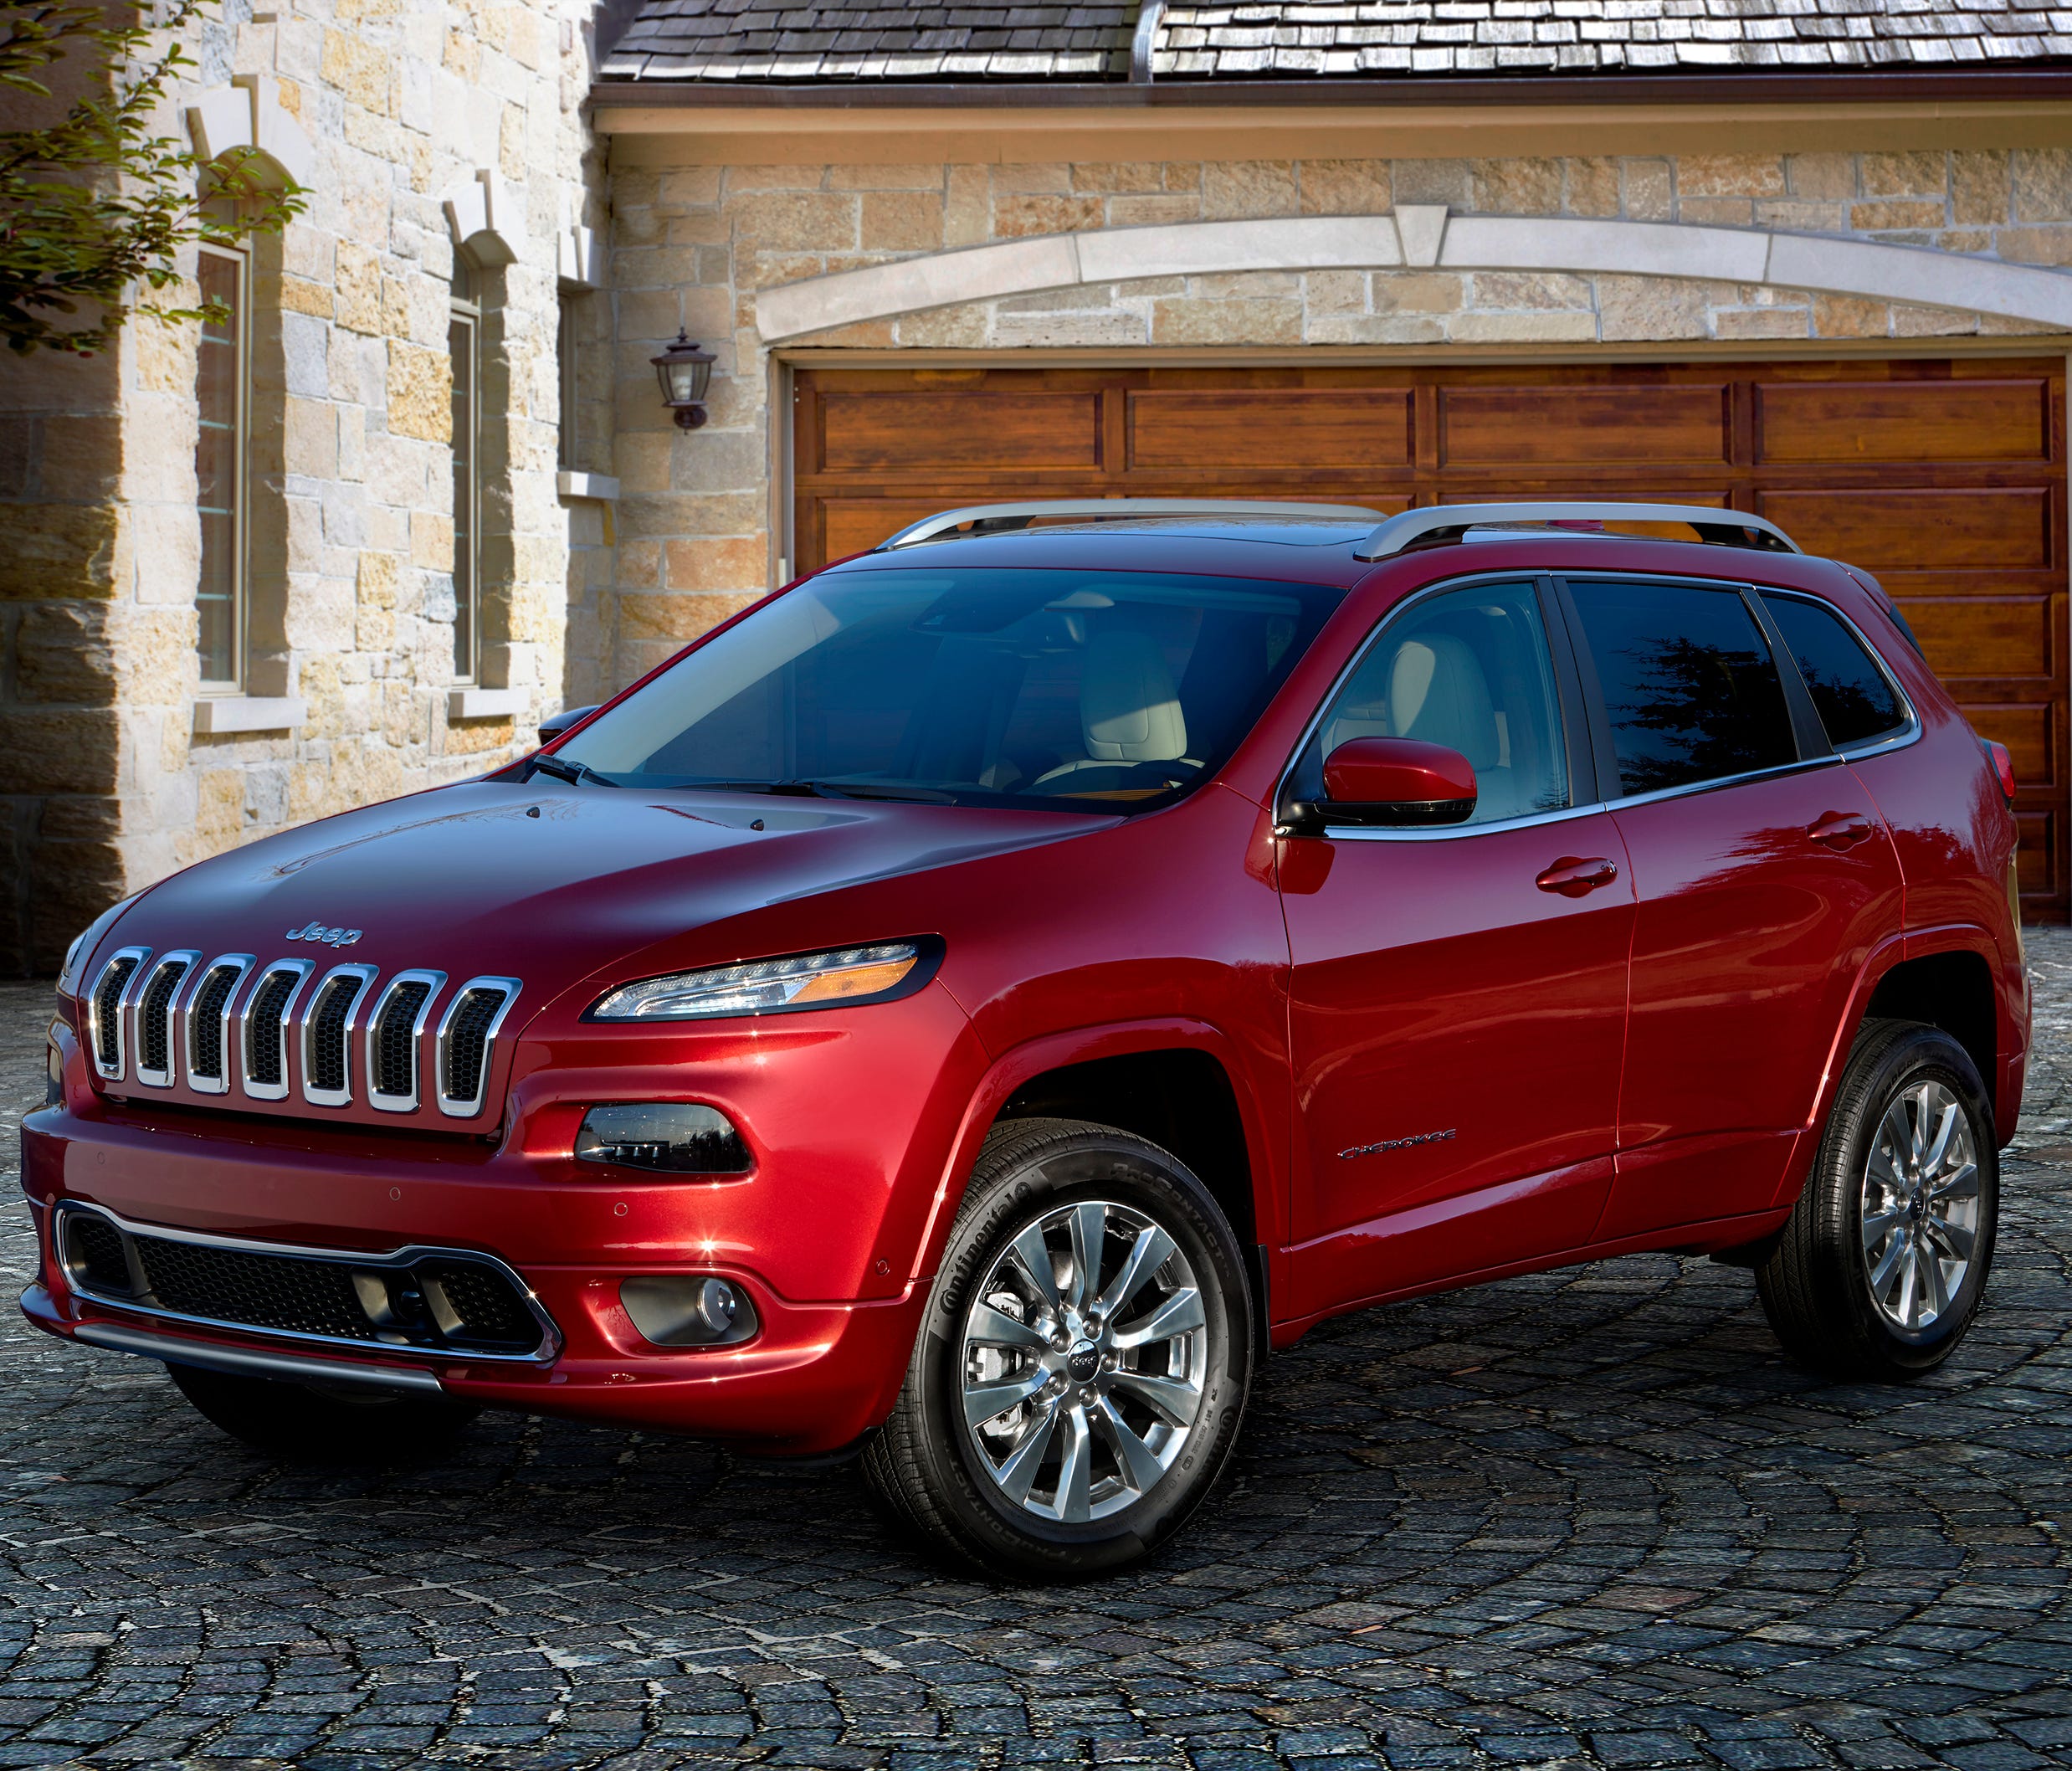 The 2018 Jeep Cherokee, a vehicle that has a significant discount going into Memorial Day weekend. Buyers will land on the Cherokee for its off-road abilities, and Edmunds particularly likes the Trailhawk trim.